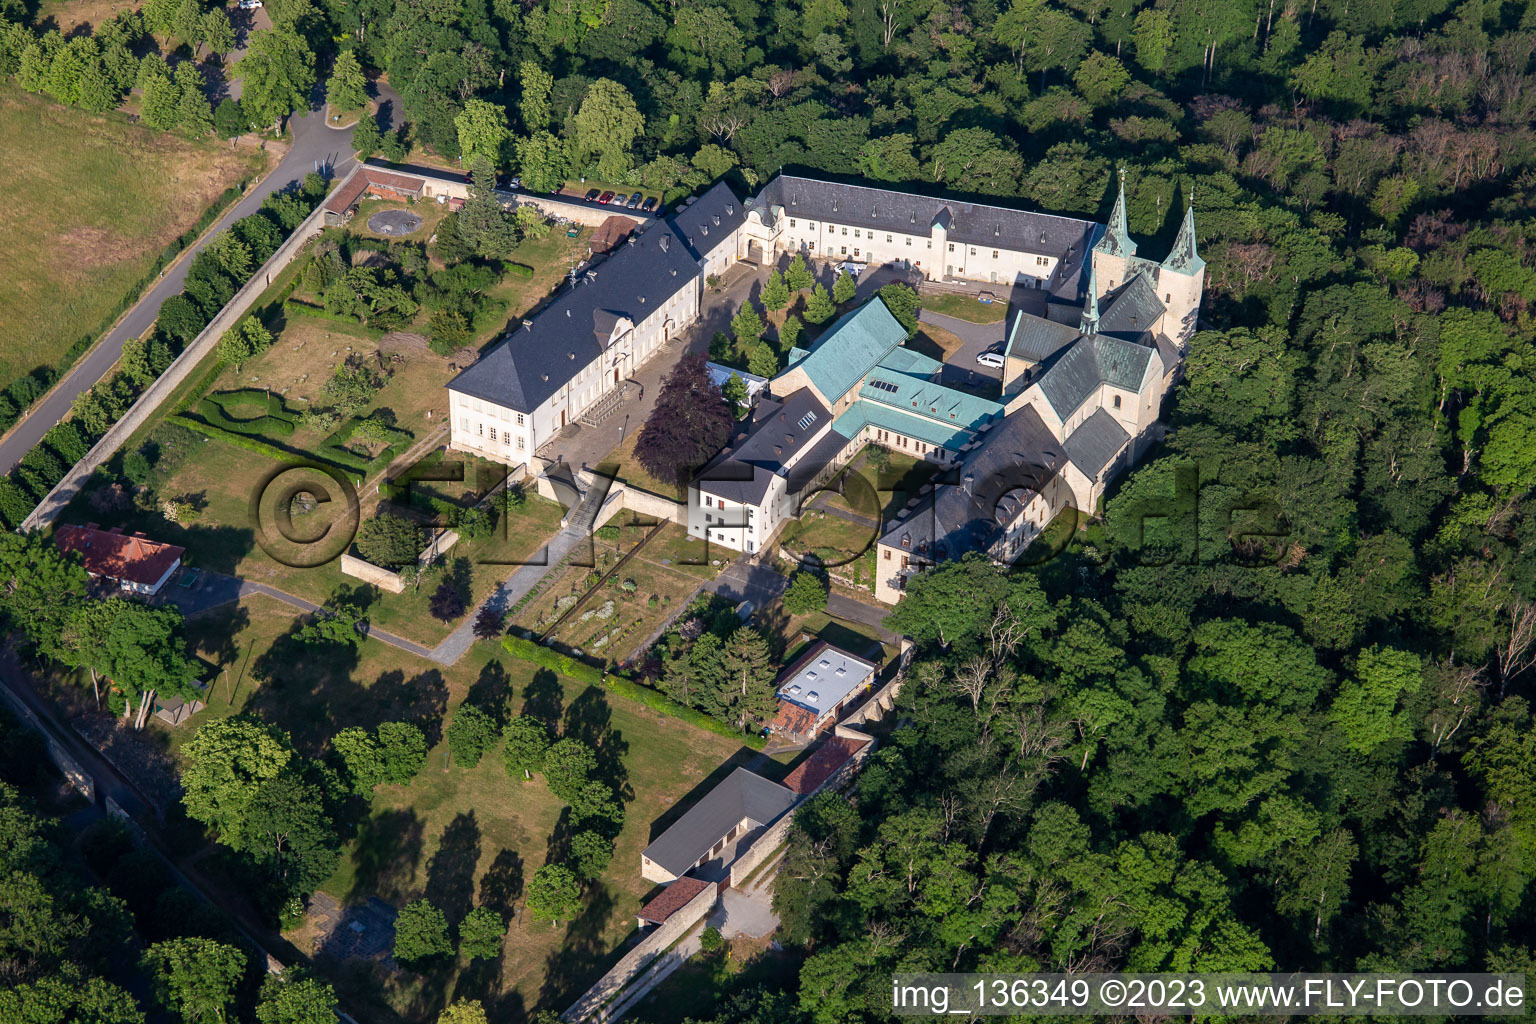 Huysburg Monastery in the district Röderhof in Huy in the state Saxony-Anhalt, Germany seen from above